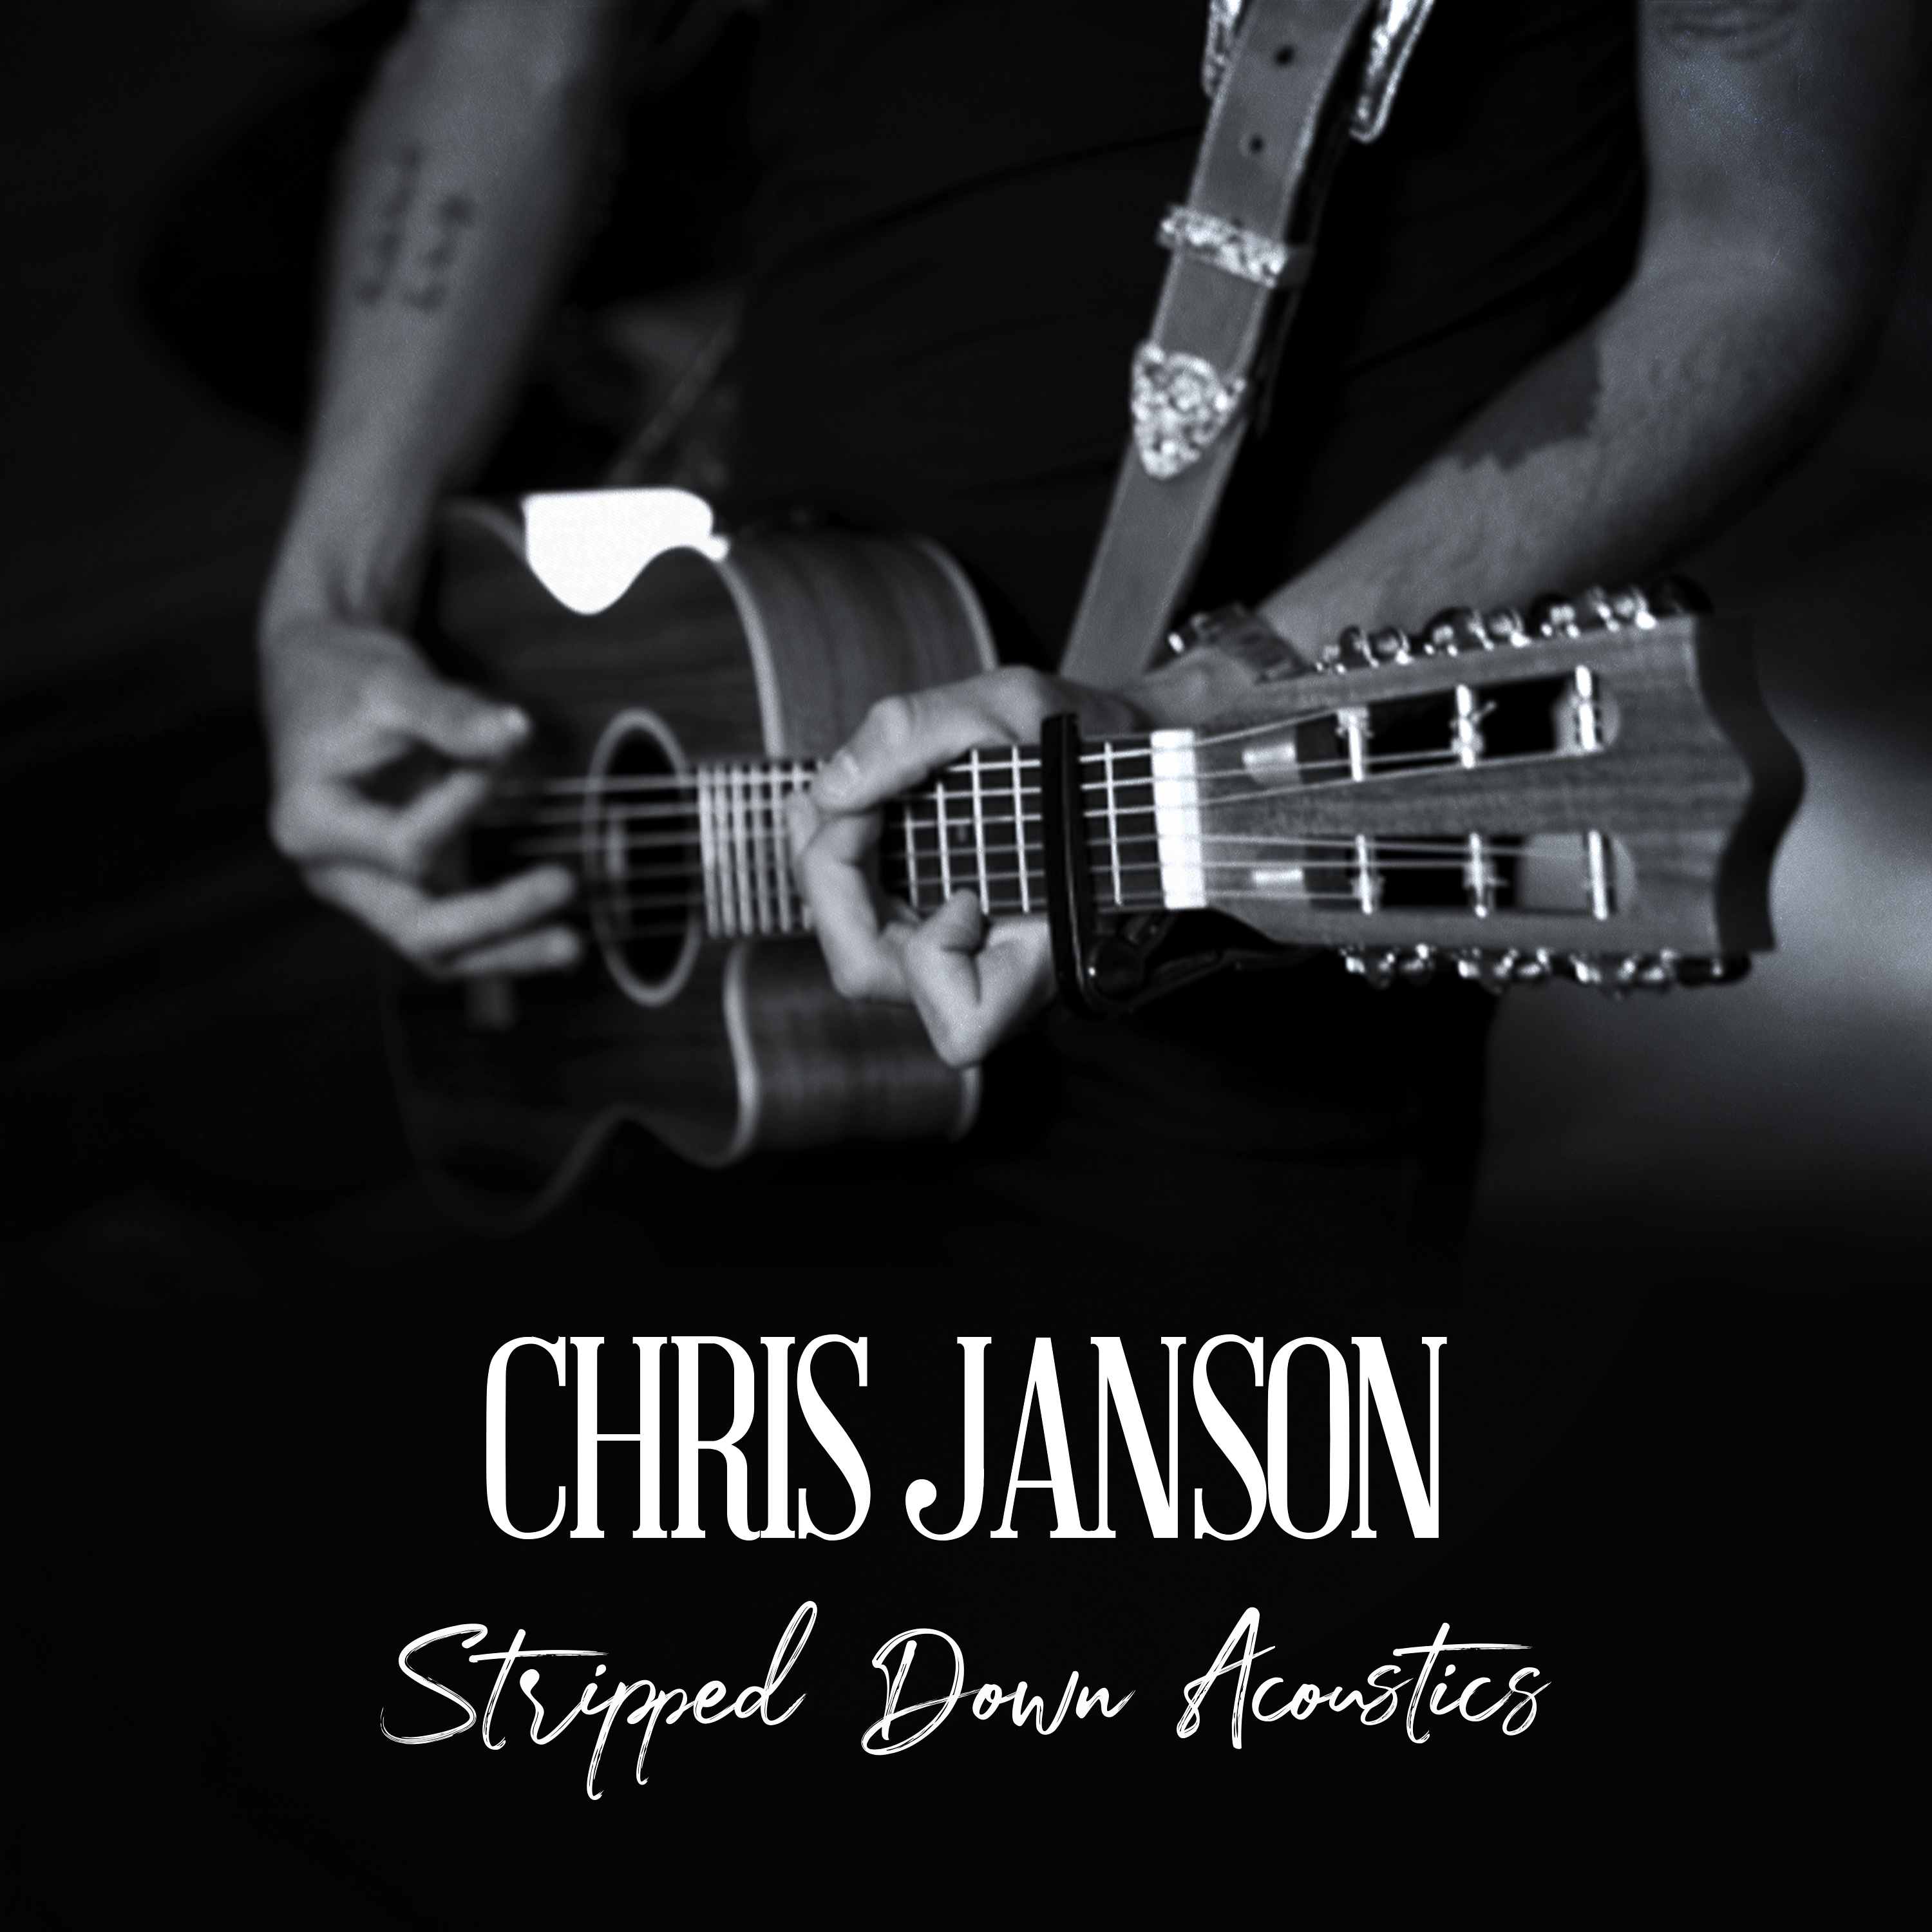 CHRIS JANSON RELEASES STRIPPED DOWN ACOUSTICS INCLUDING FOUR SONGS AND ACOUSTIC VIDEO FOR FAN FAVORITE “HAWAII ON ME”